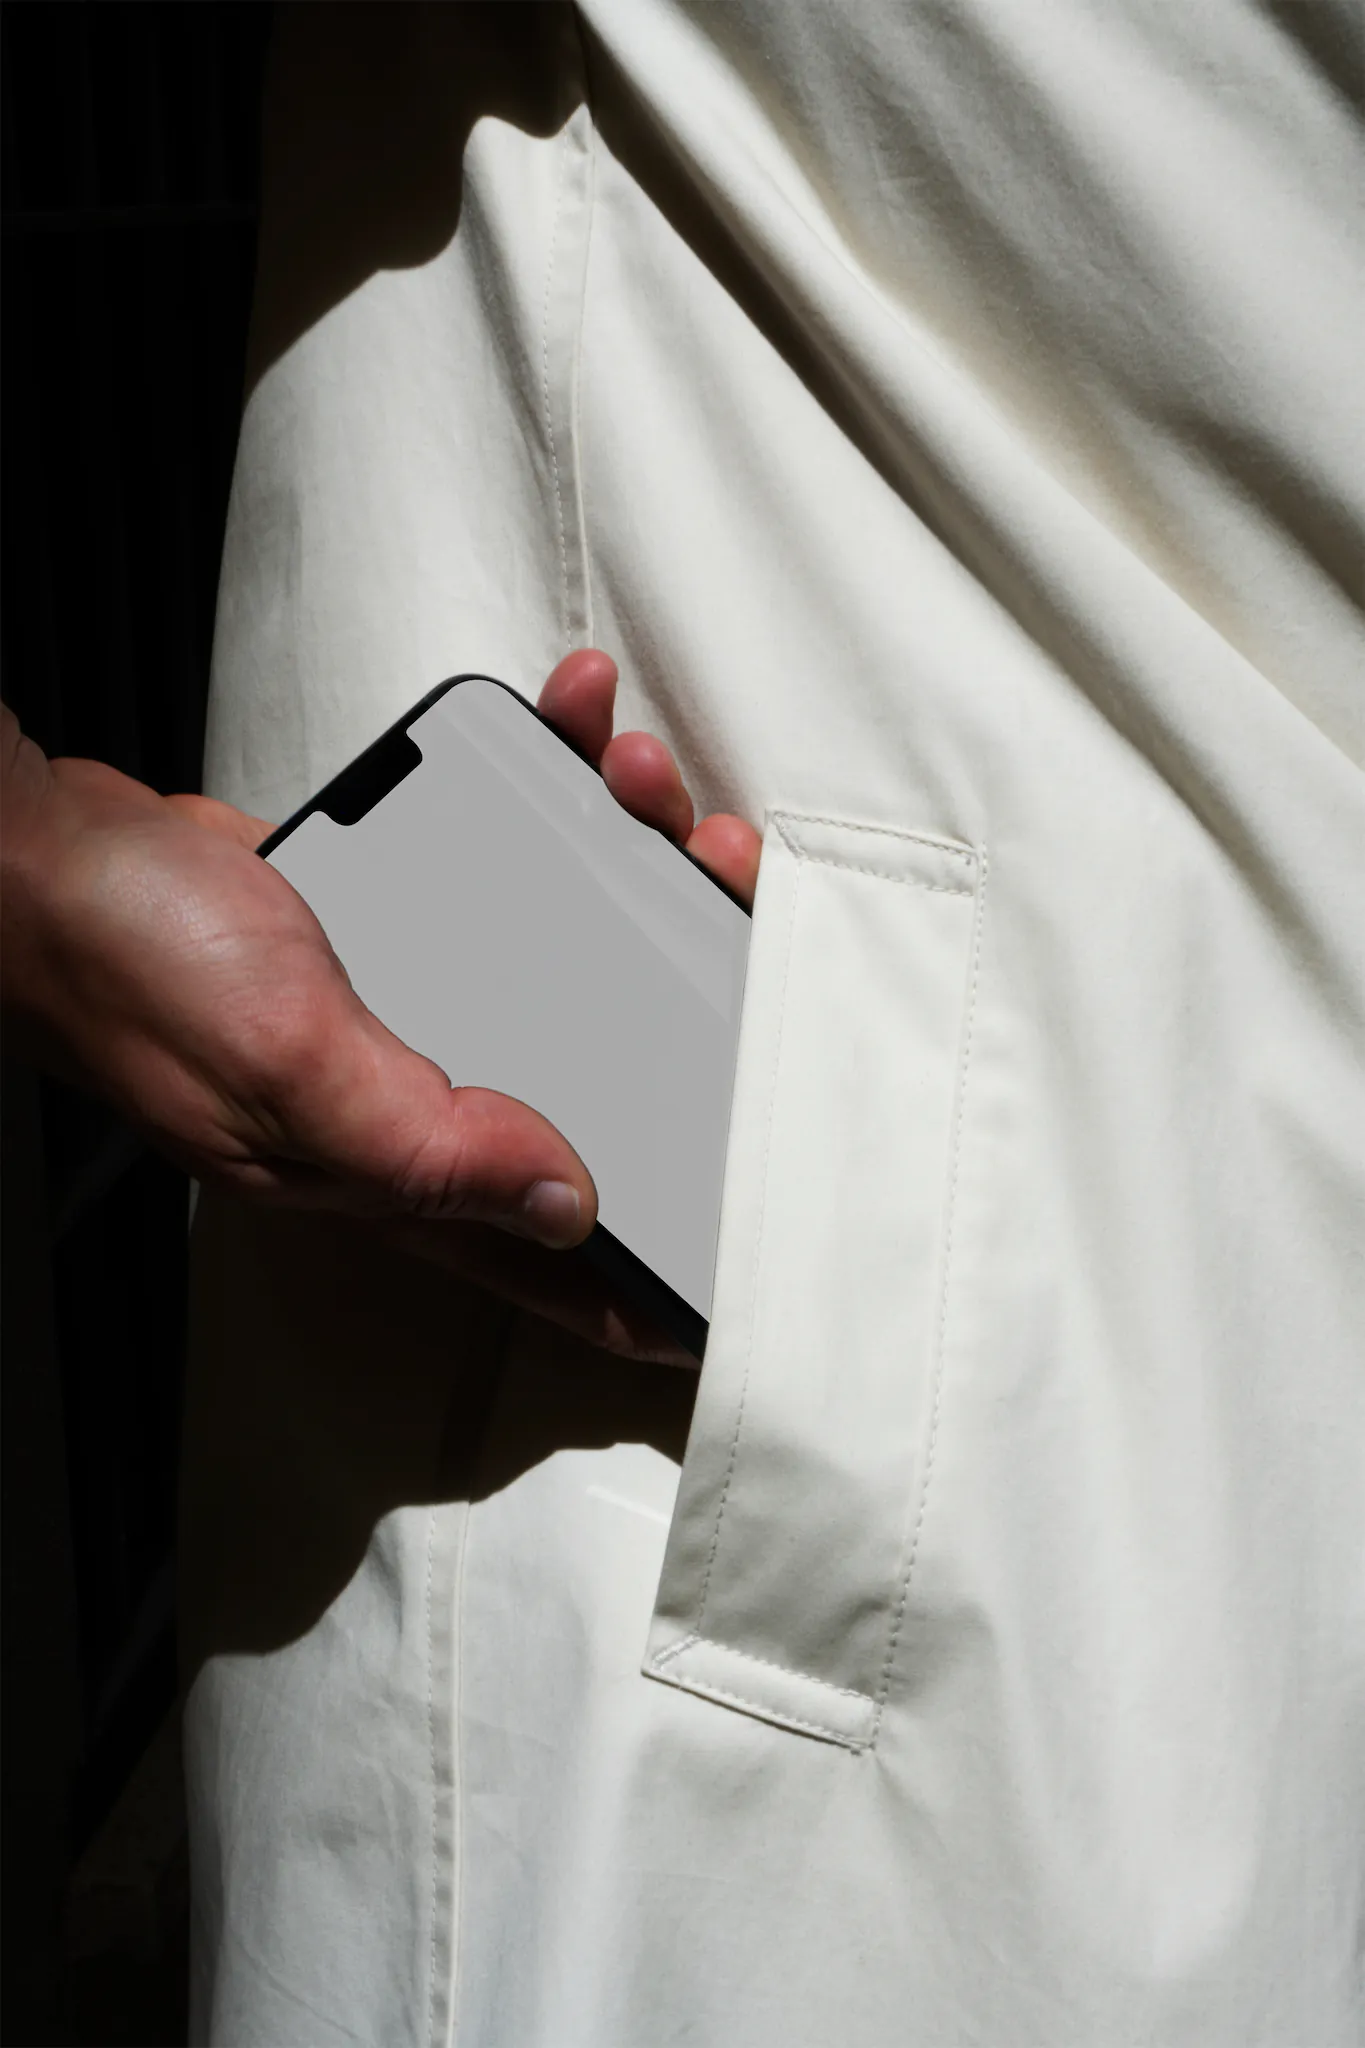 iPhone mockup. Man taking out an iPhone from the pocket of his white coat. Tech mockup.